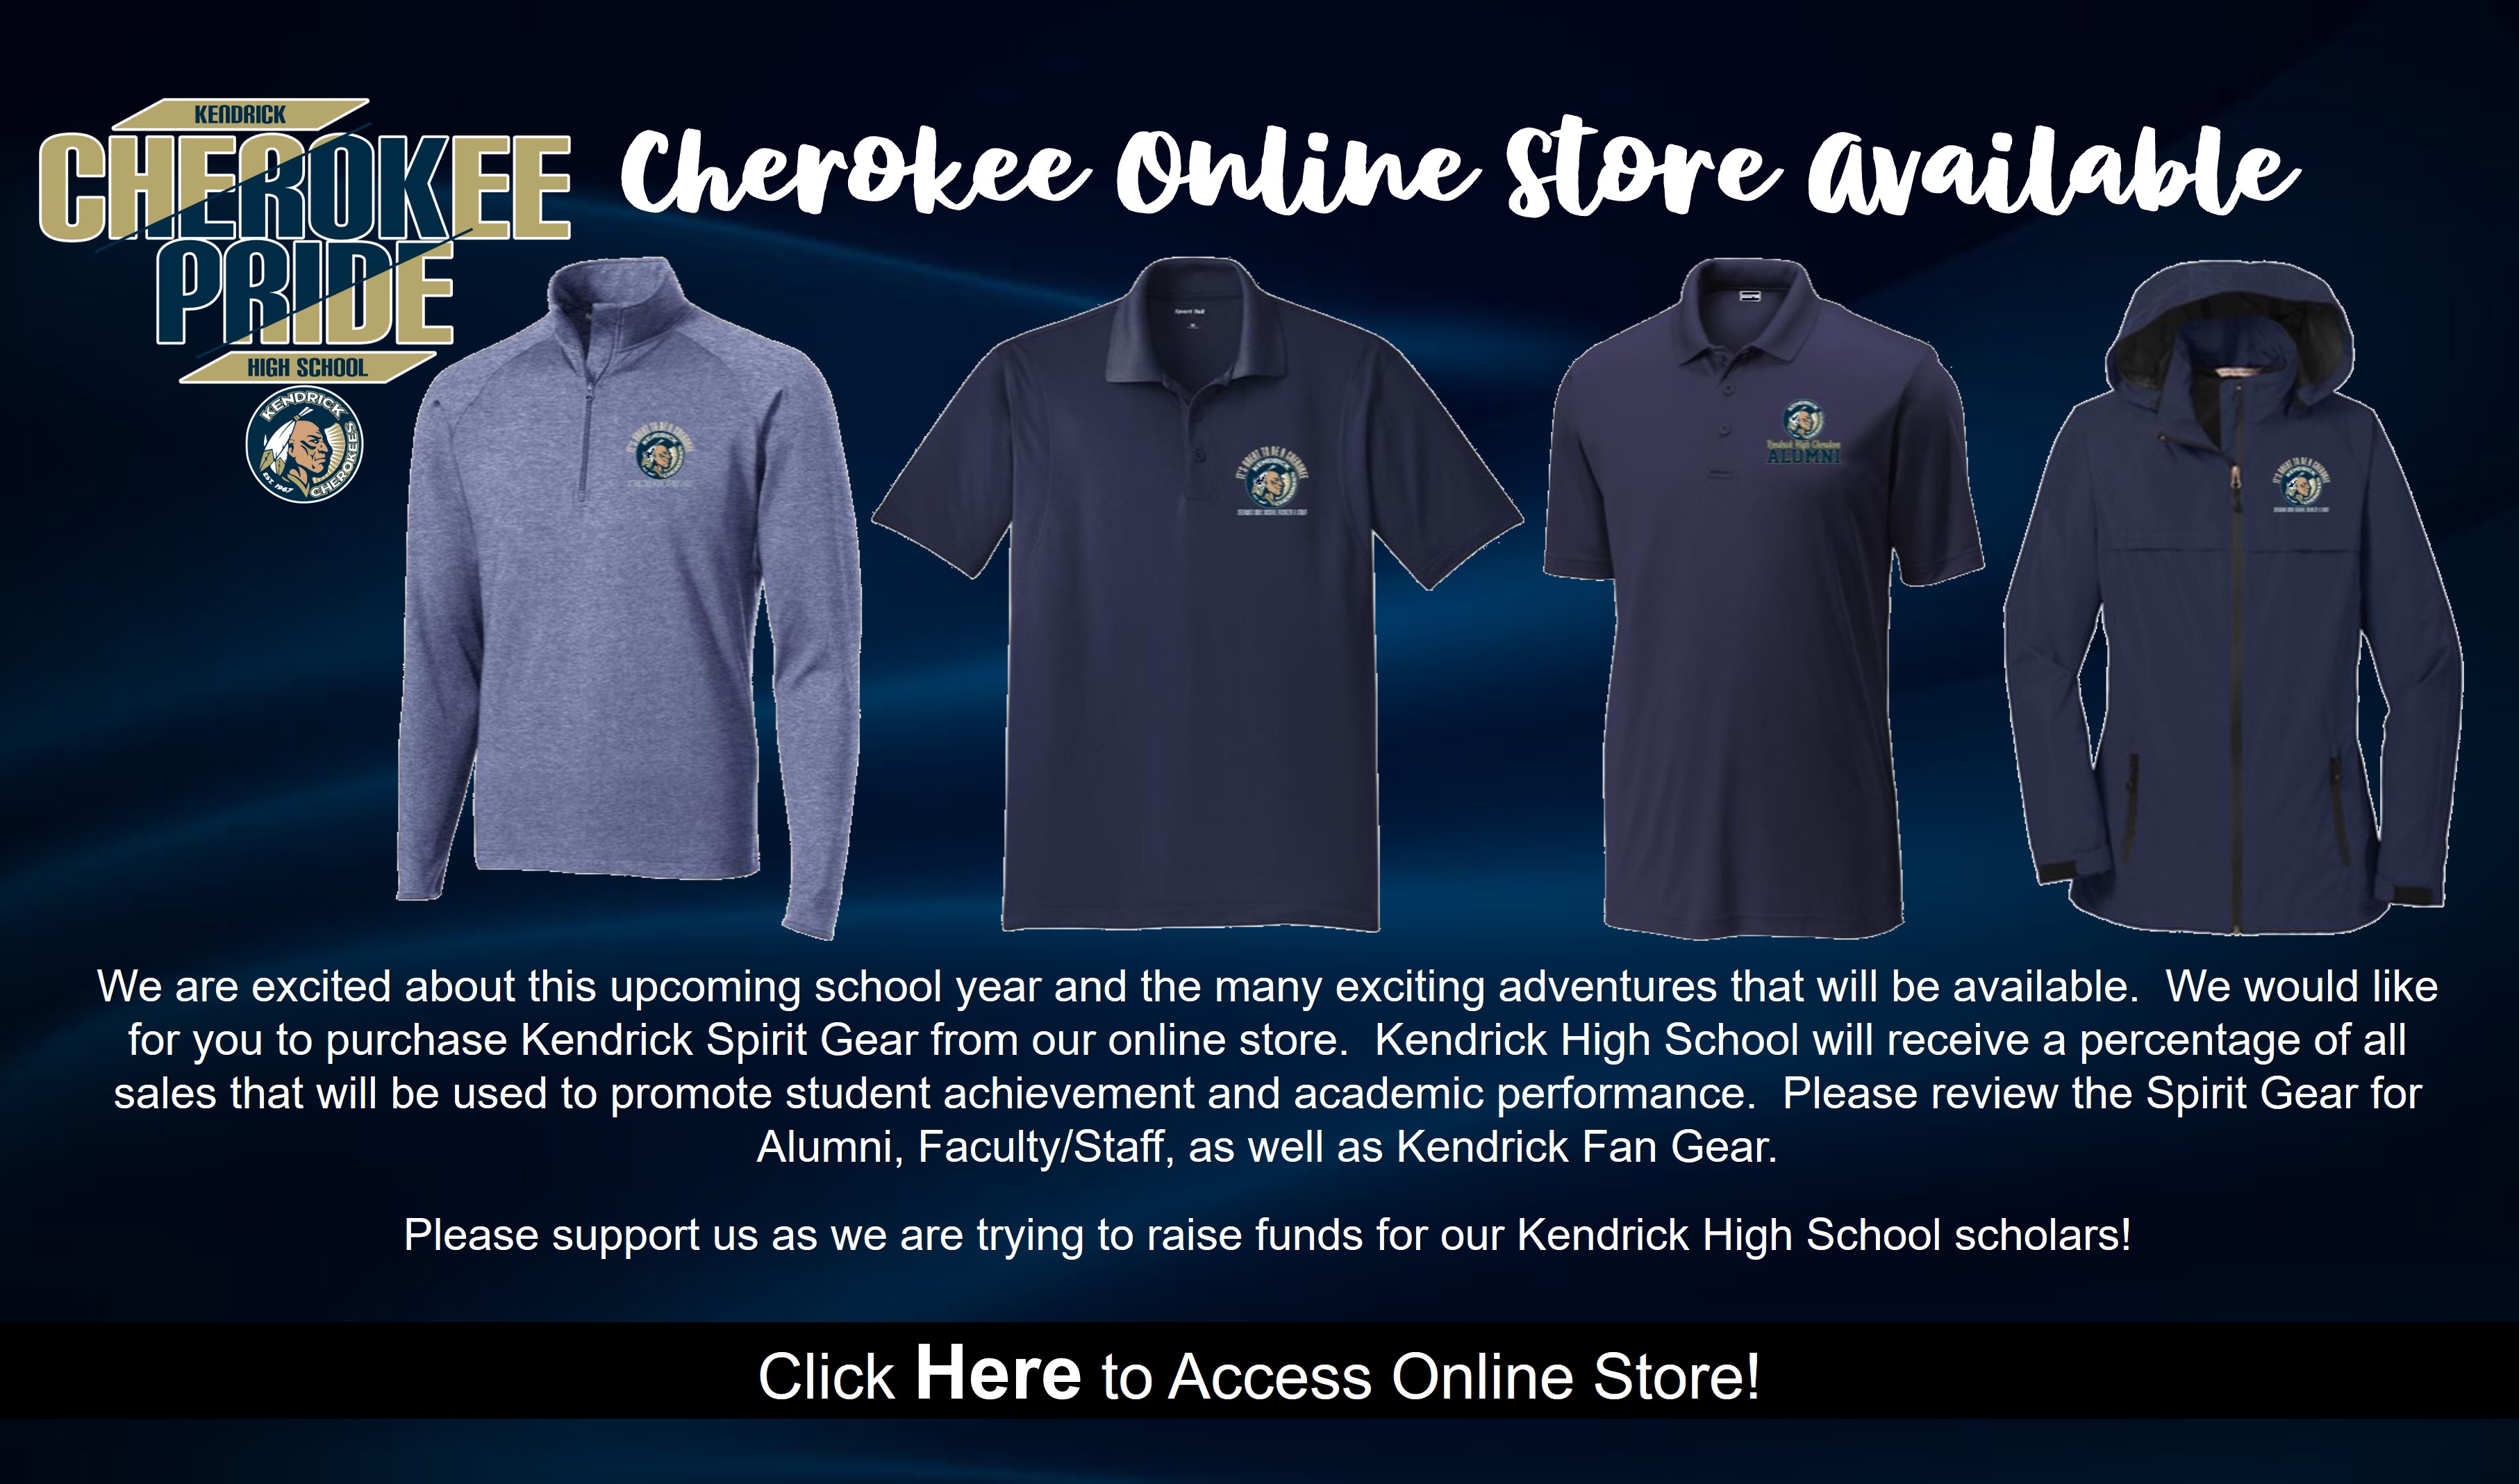 We are excited about this upcoming school year and the many exciting adventures that will be available.  We would like for you to purchase Kendrick Spirit Gear from our online store.  Kendrick High School will receive a percentage of all sales that will be used to promote student achievement and academic performance.  Please review the Spirit Gear for Alumni, Faculty/Staff, as well as Kendrick Fan Gear.  Please support us as we are trying to raise funds for our Kendrick High School scholars!